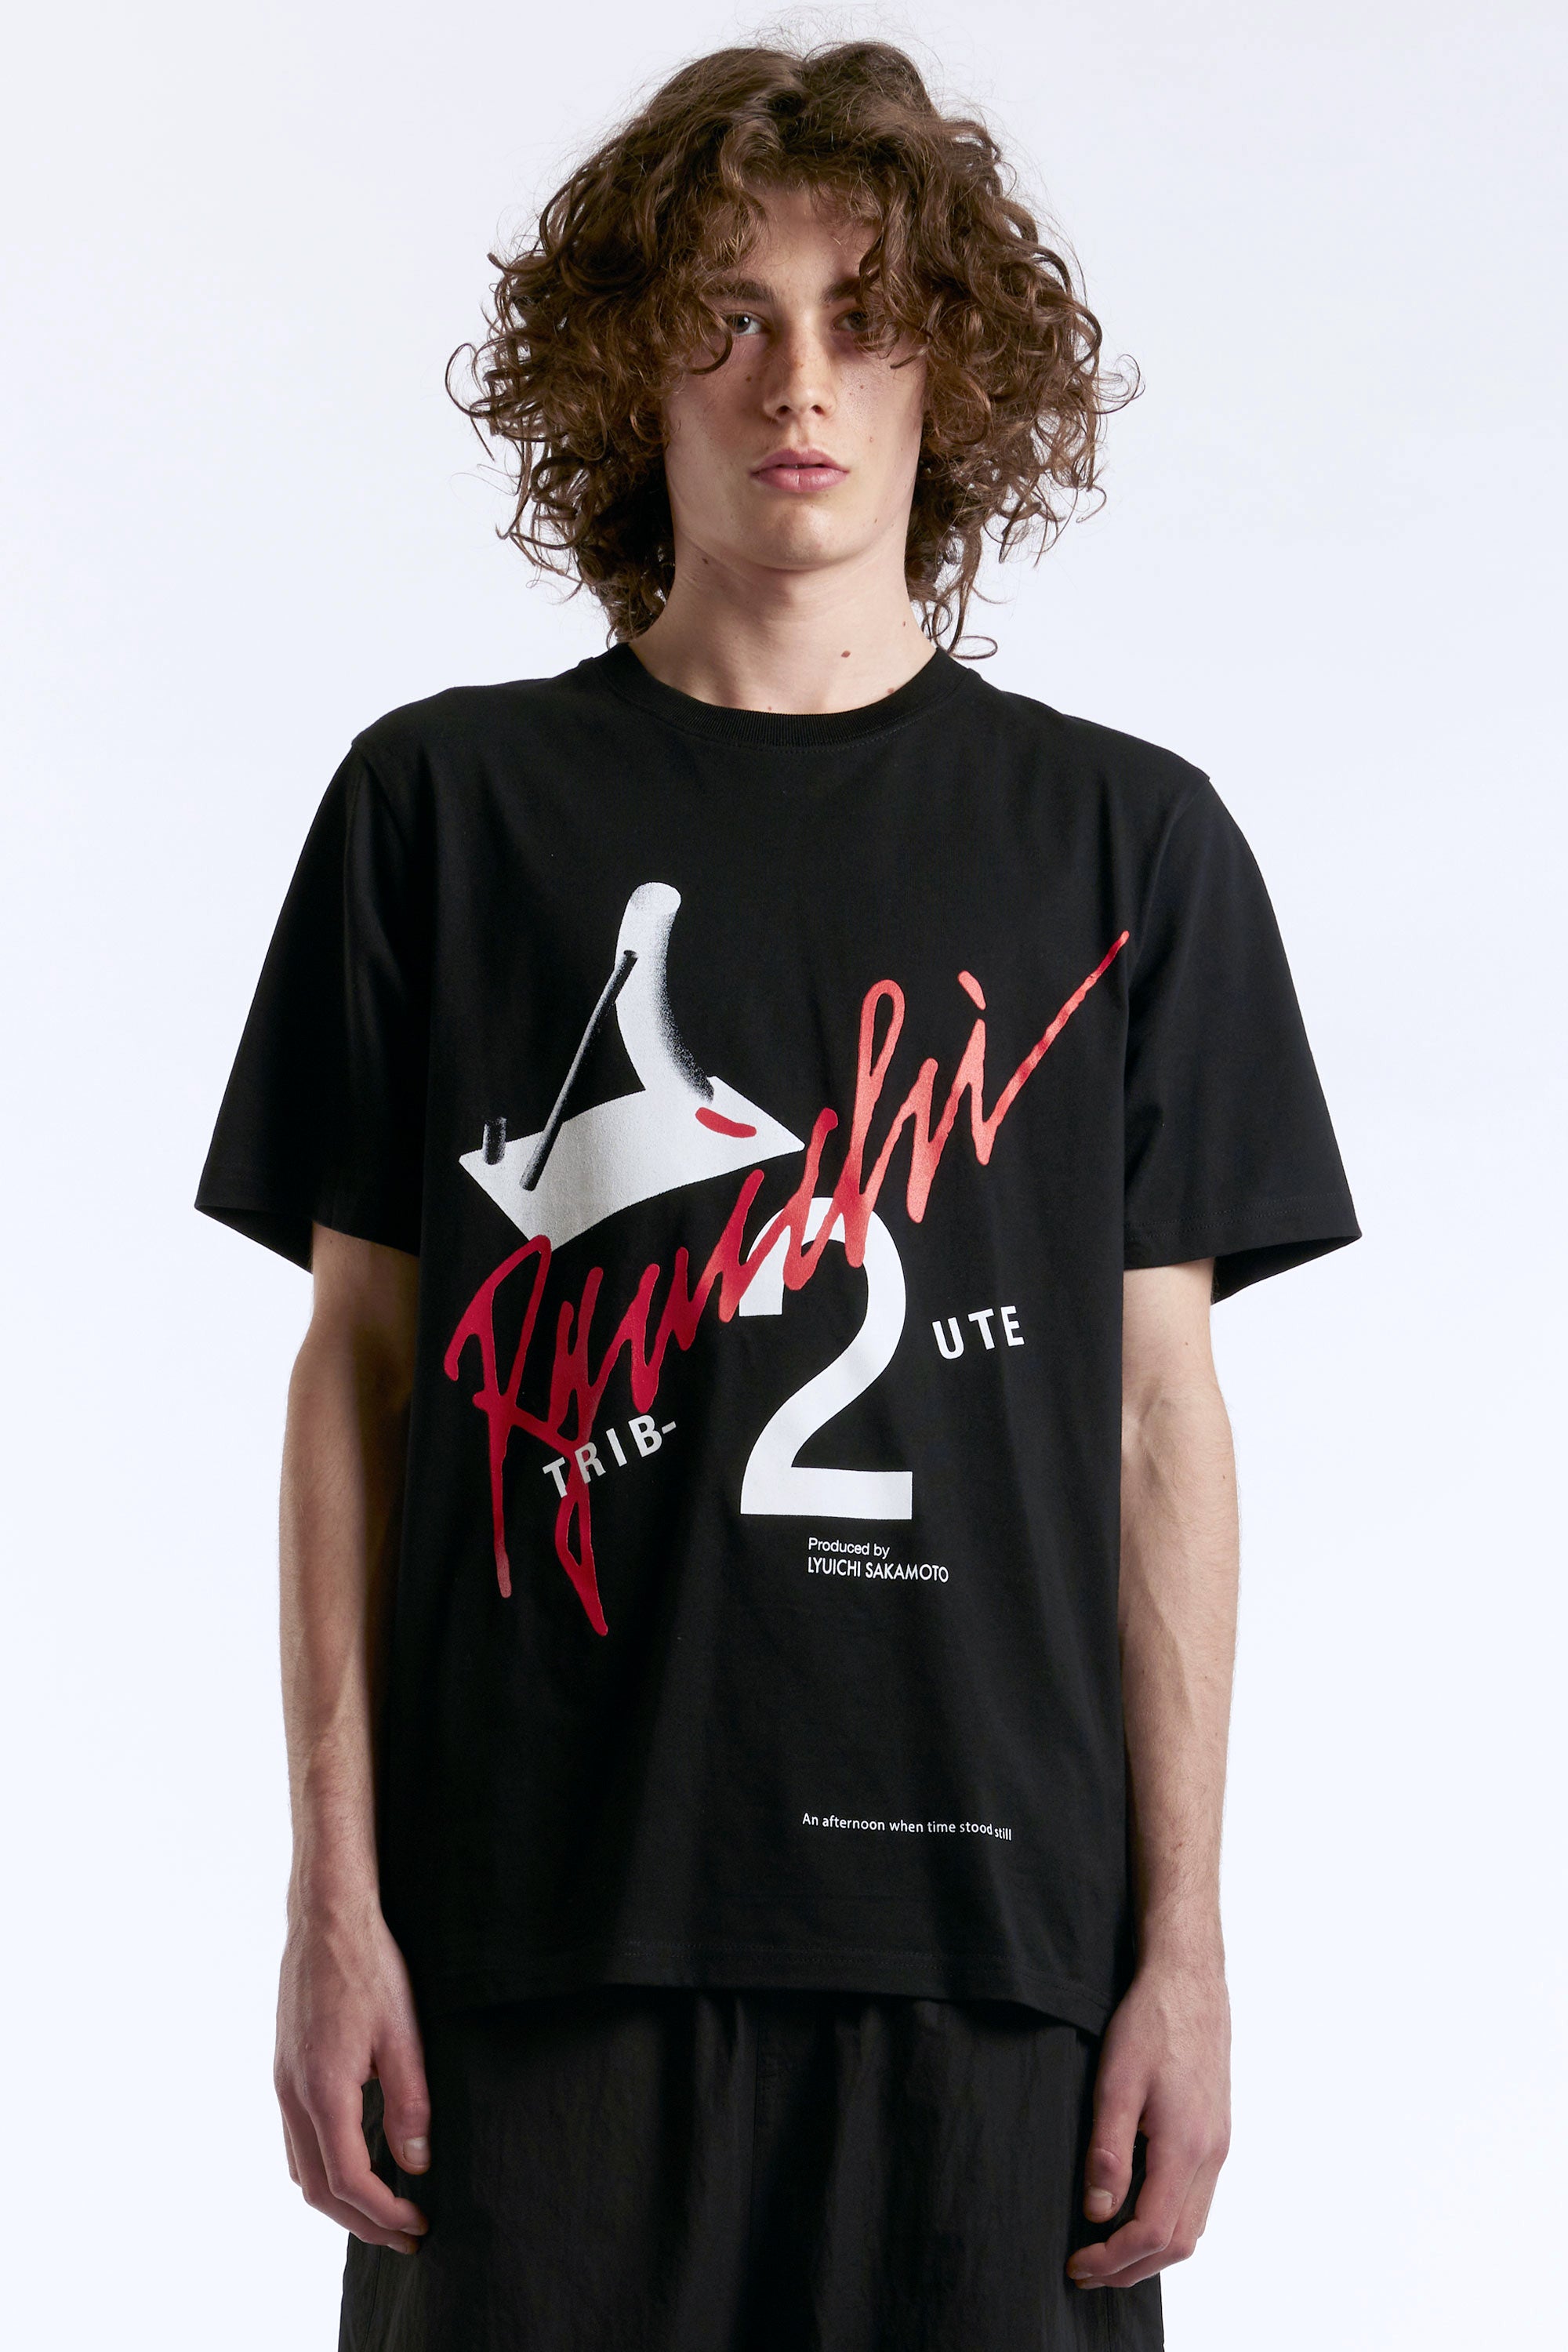 The PAMMIX029 - NERVES KNIVES TEE BLACK available online with global shipping, and in PAM Stores Melbourne and Sydney.